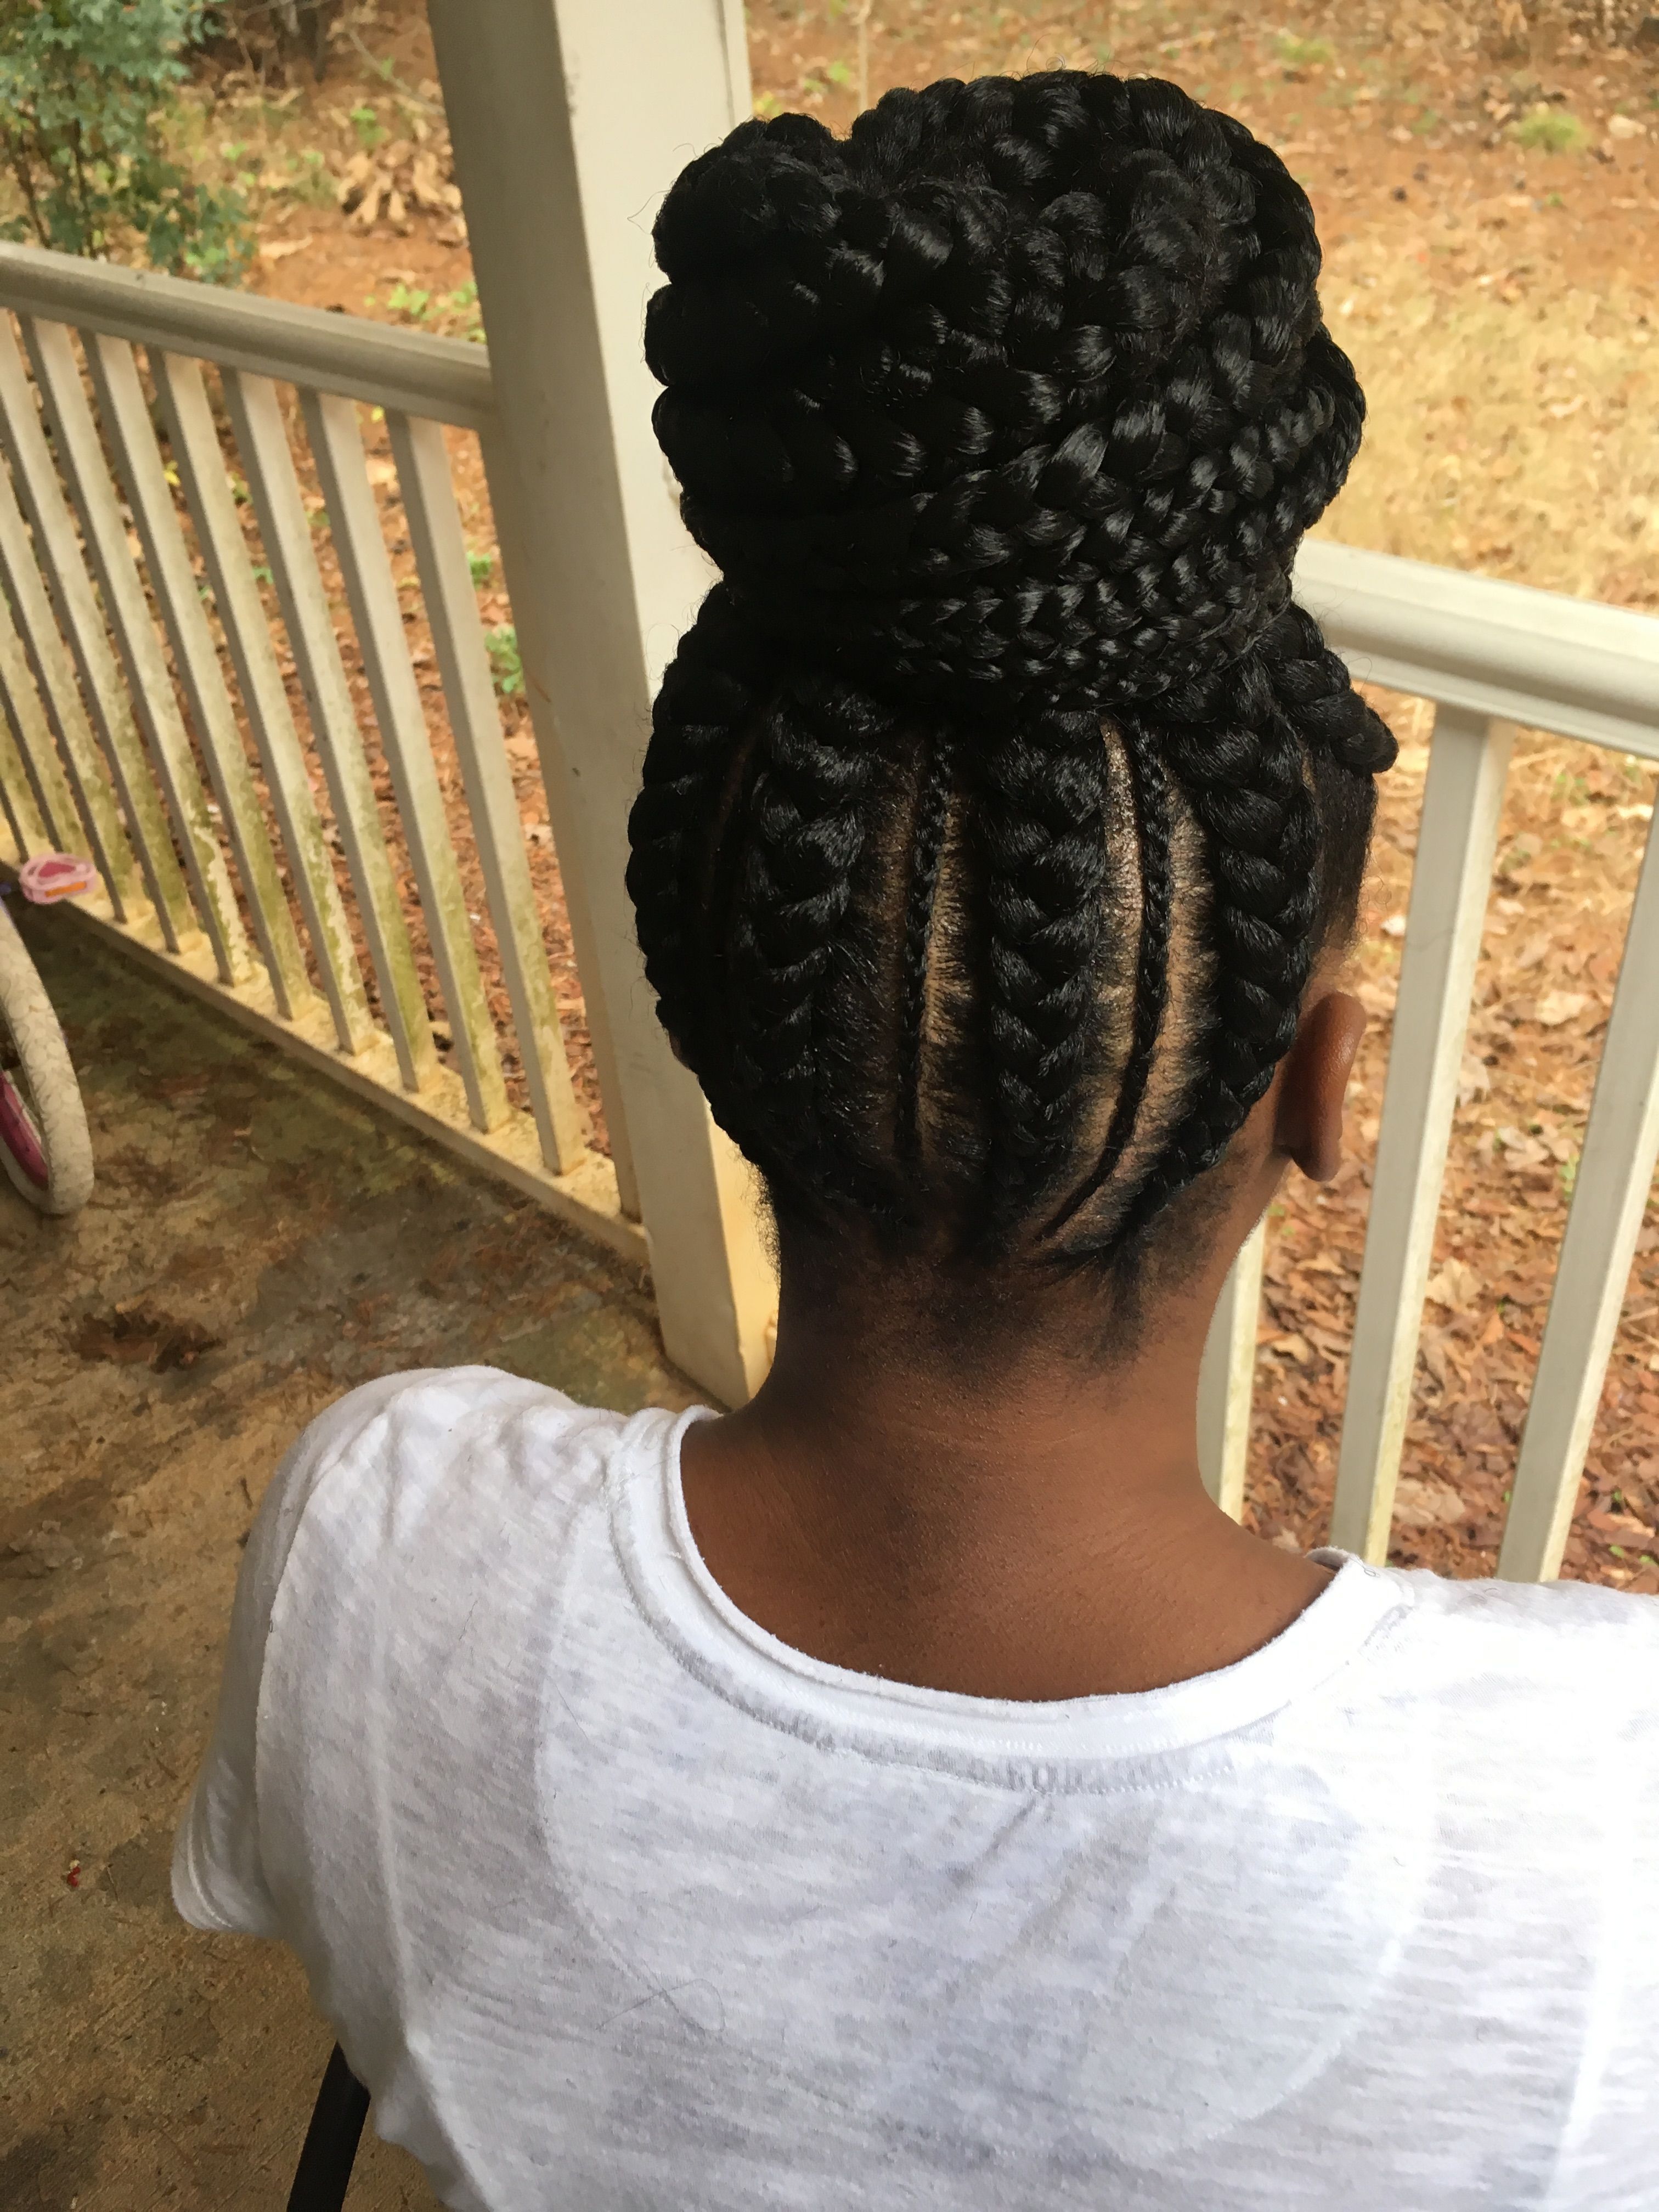 Hairstyles : Braided Updo African American Wonderful Feed In In Well Known Lovely Black Braided Updo Hairstyles (View 12 of 20)